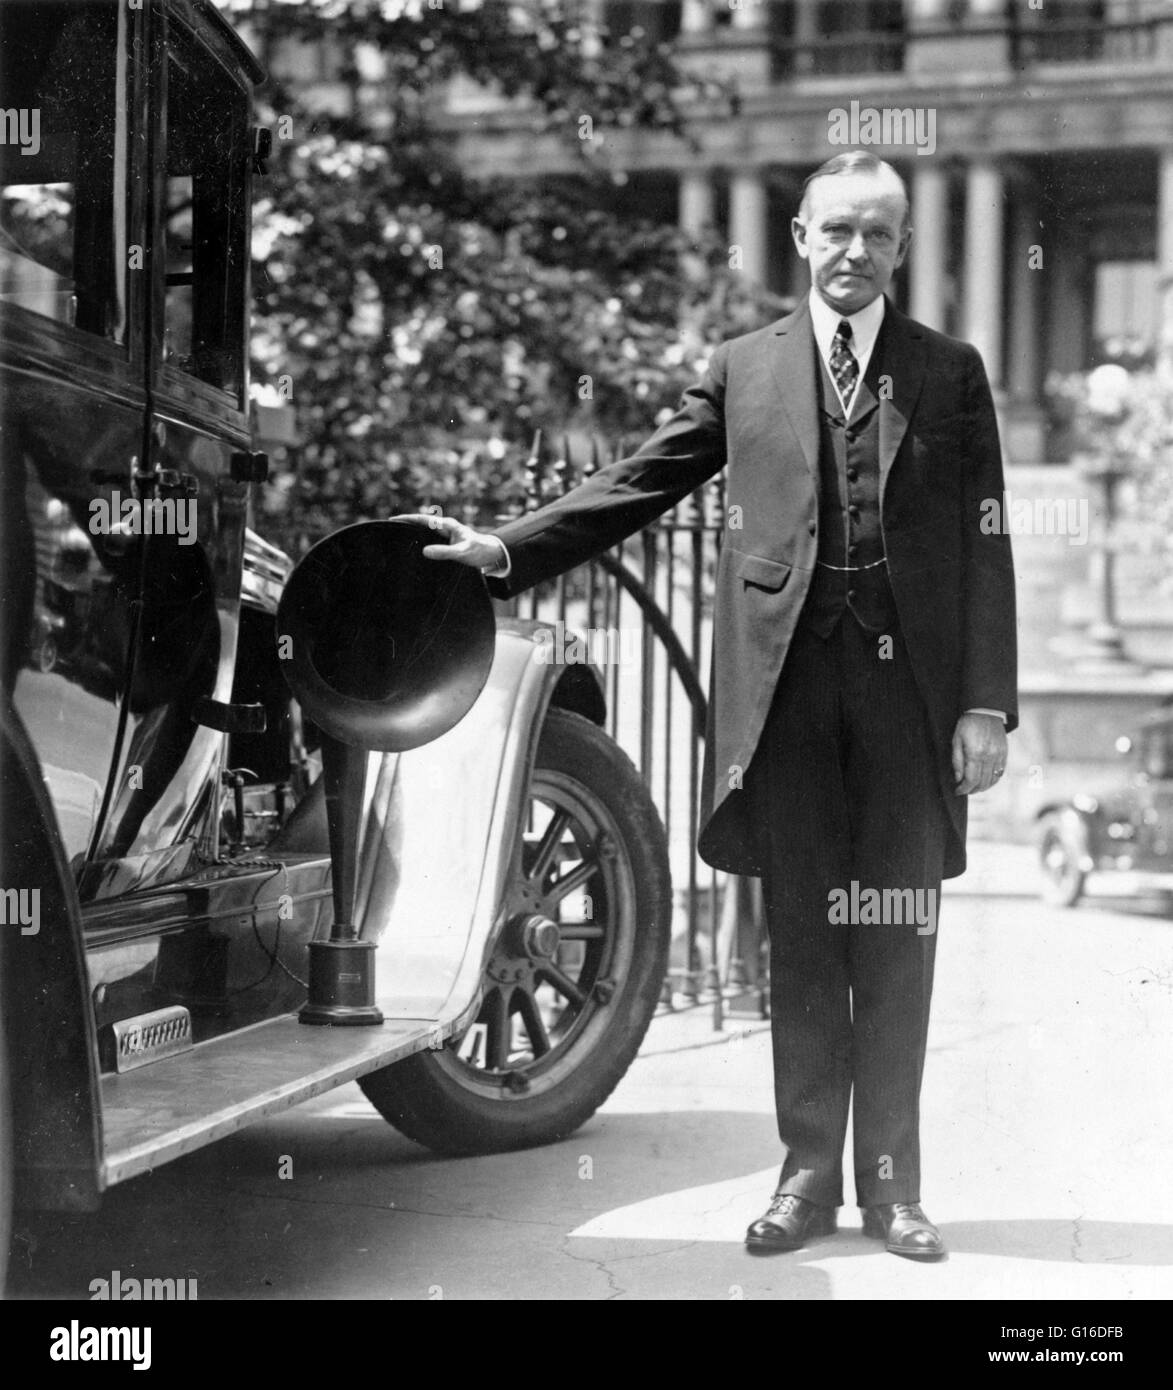 President Coolidge with his right hand on piece of radio equipment used on automobiles during the campaign, 1924. John Calvin Coolidge, Jr. (July 4, 1872 - January 5, 1933) was the 30th President of the United States (1923-1929). A Republican lawyer from Stock Photo